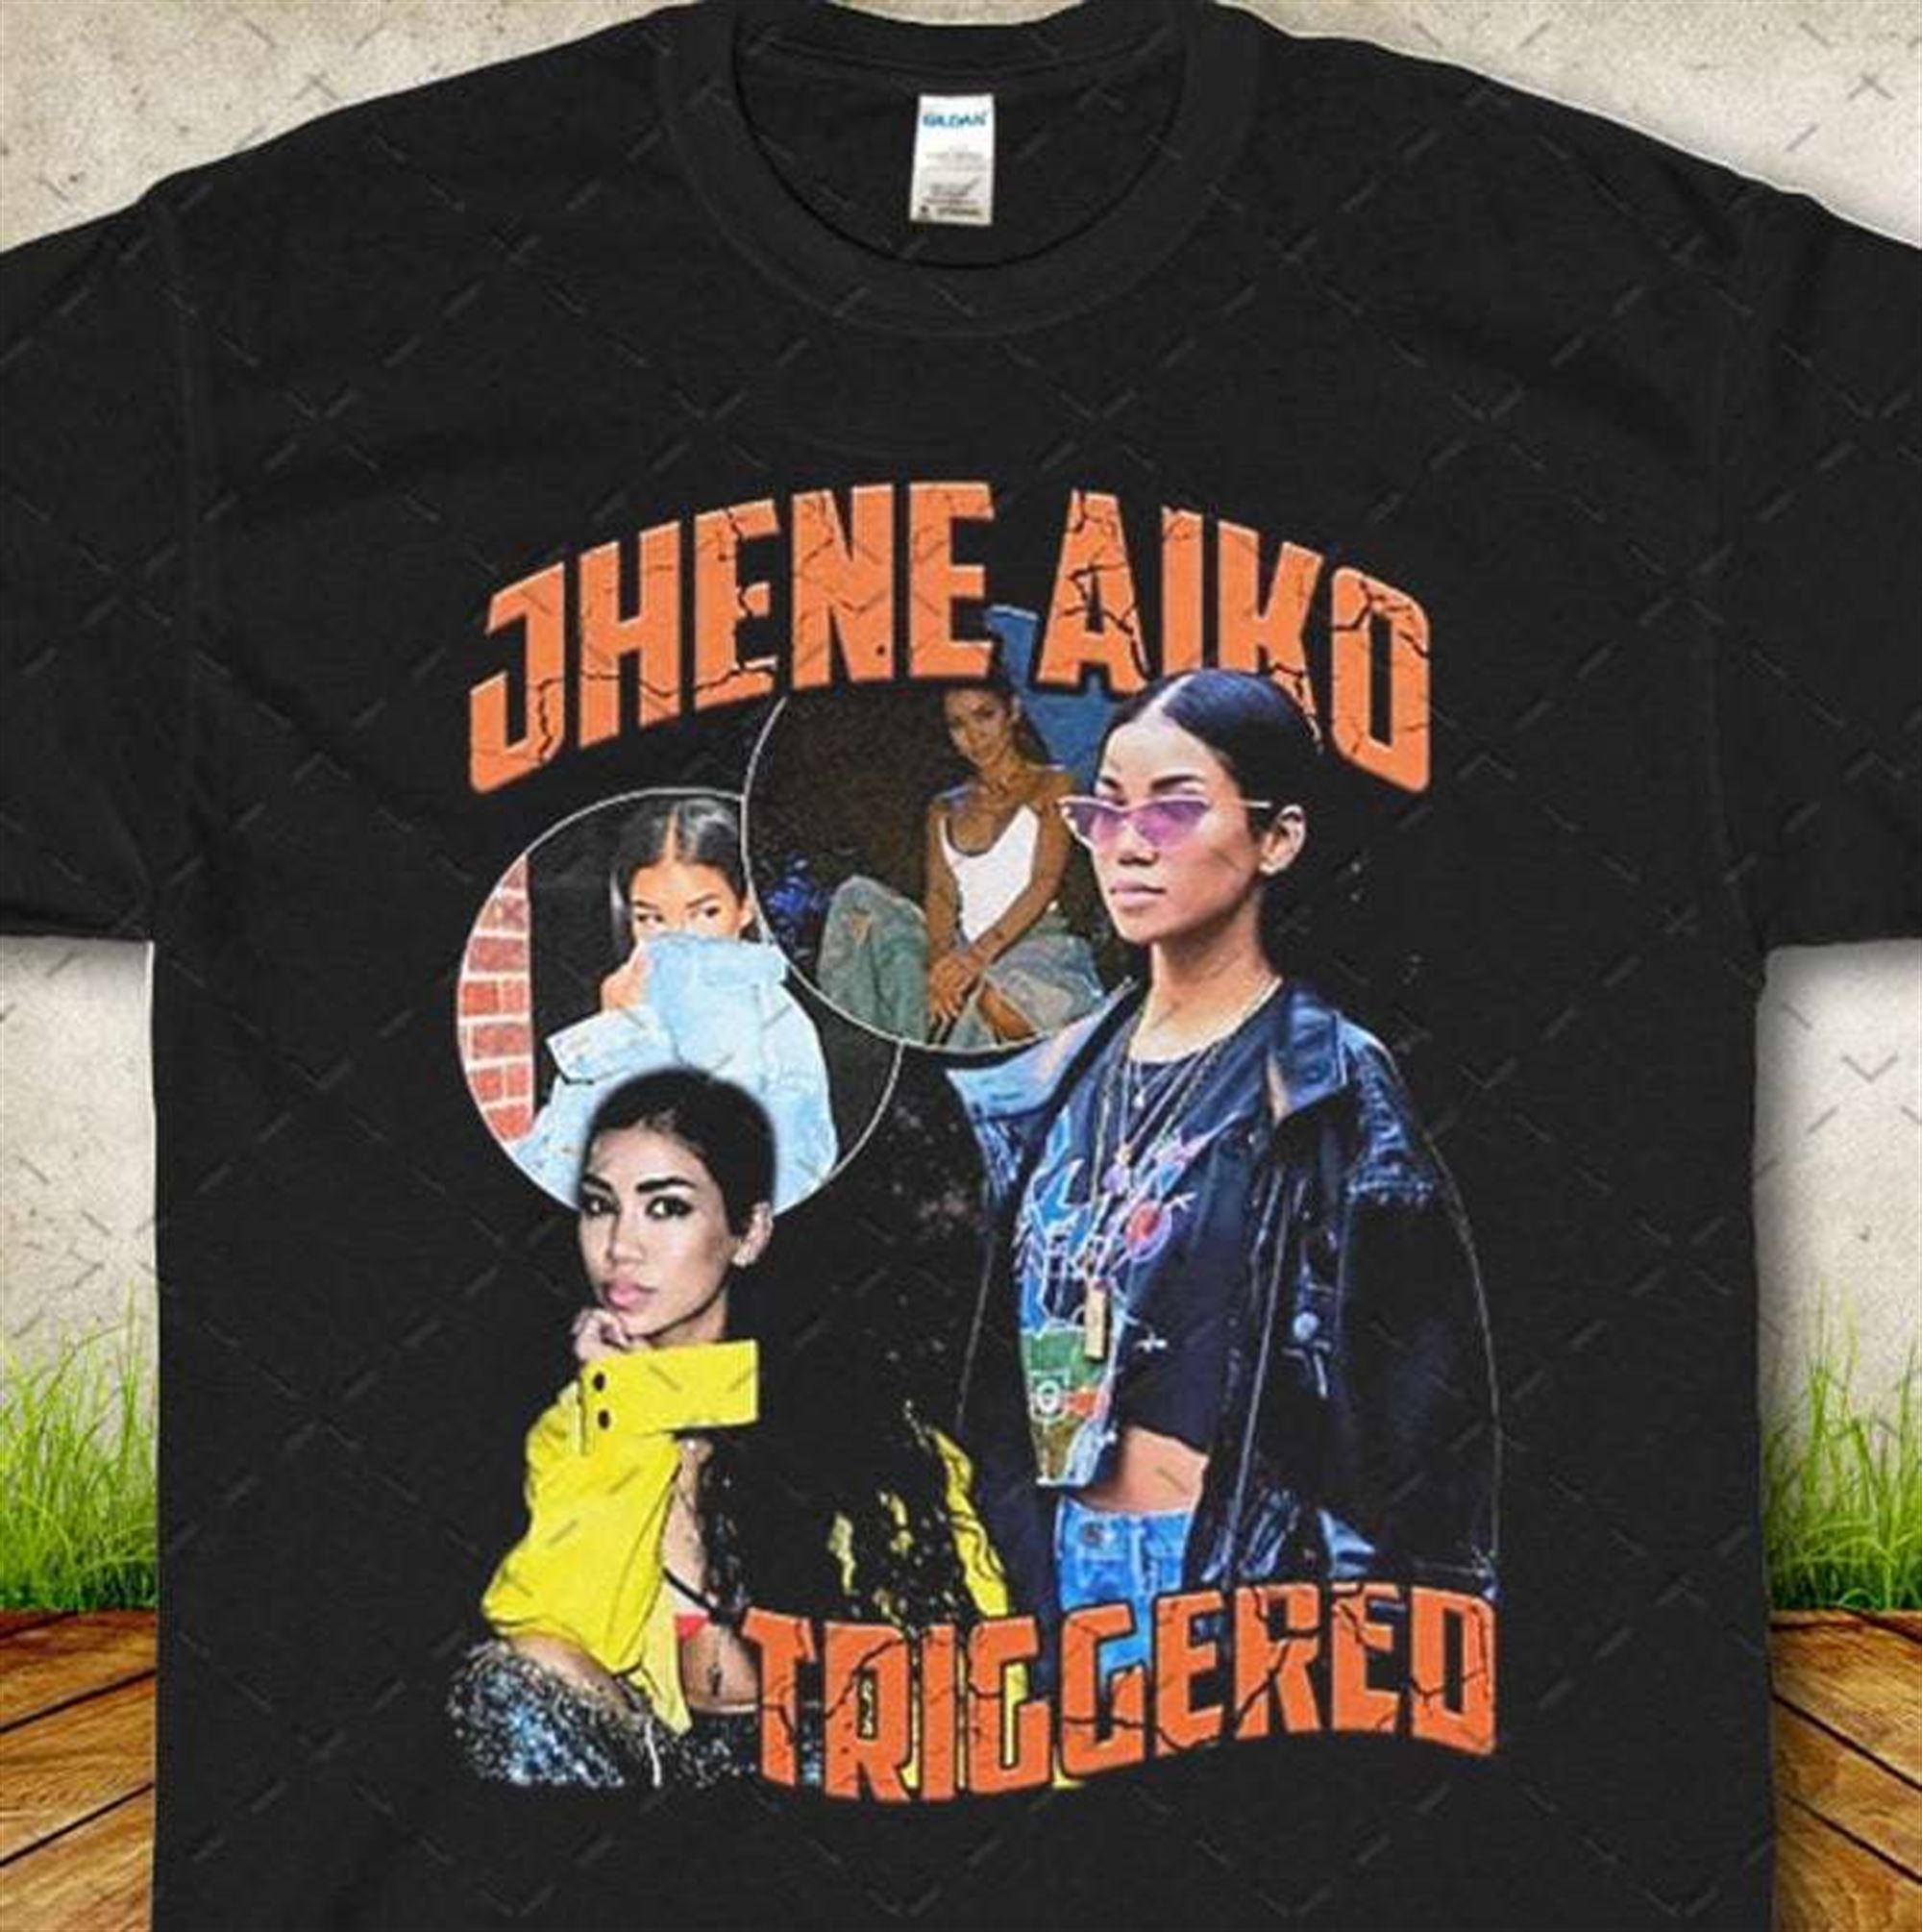 Jhene Aiko Vintage 90s T Shirt Full Size Up To 5xl